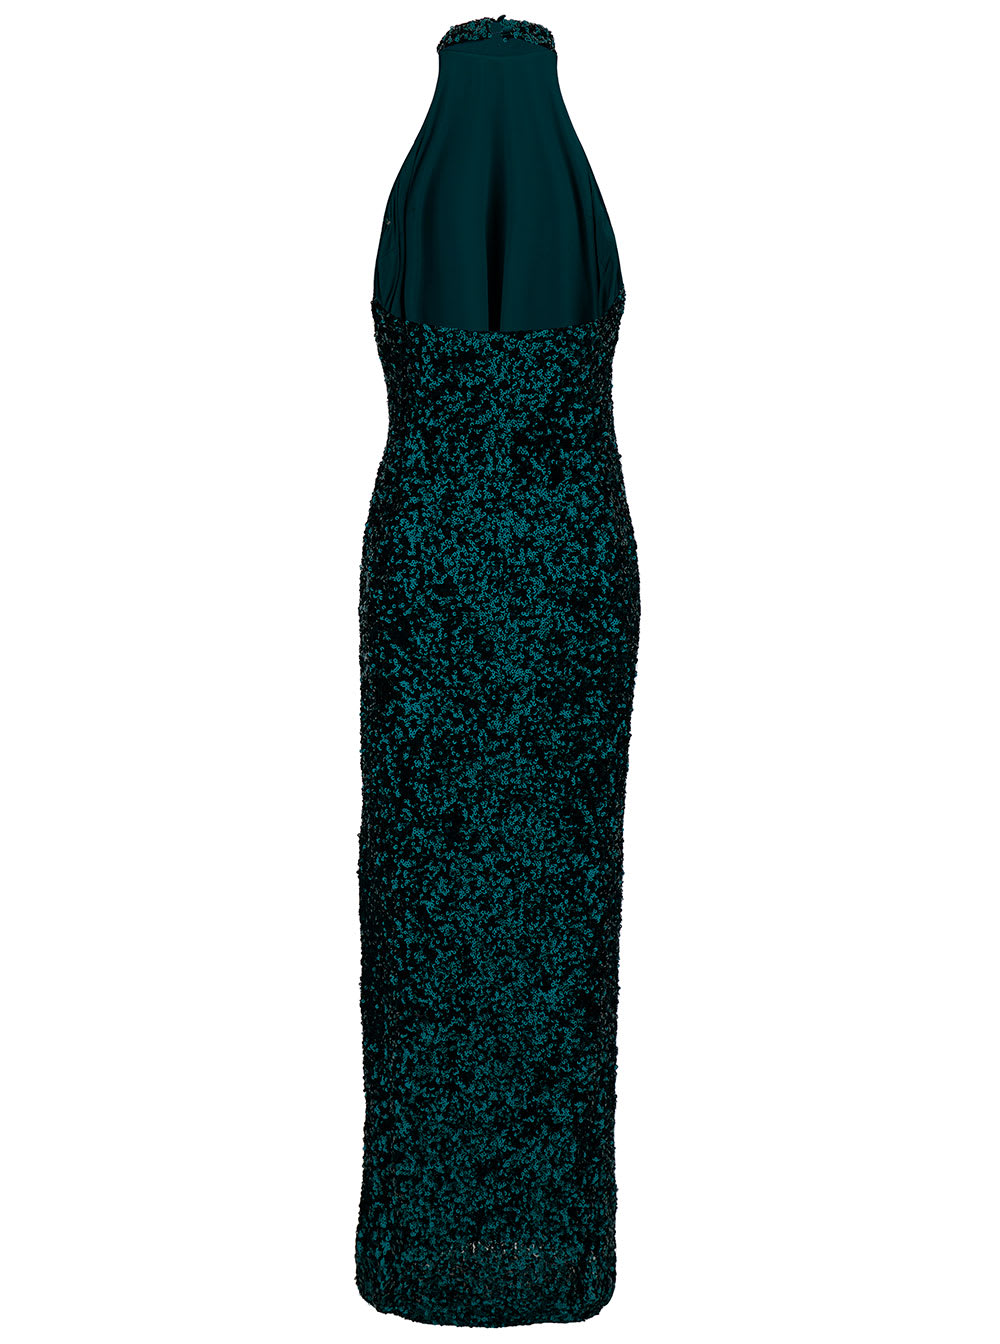 ROTATE BIRGER CHRISTENSEN LONG GREEN HALTERNECK DRESS WITH ALL-OVER PAILLETTES IN RECYCLED FABRIC WOMAN